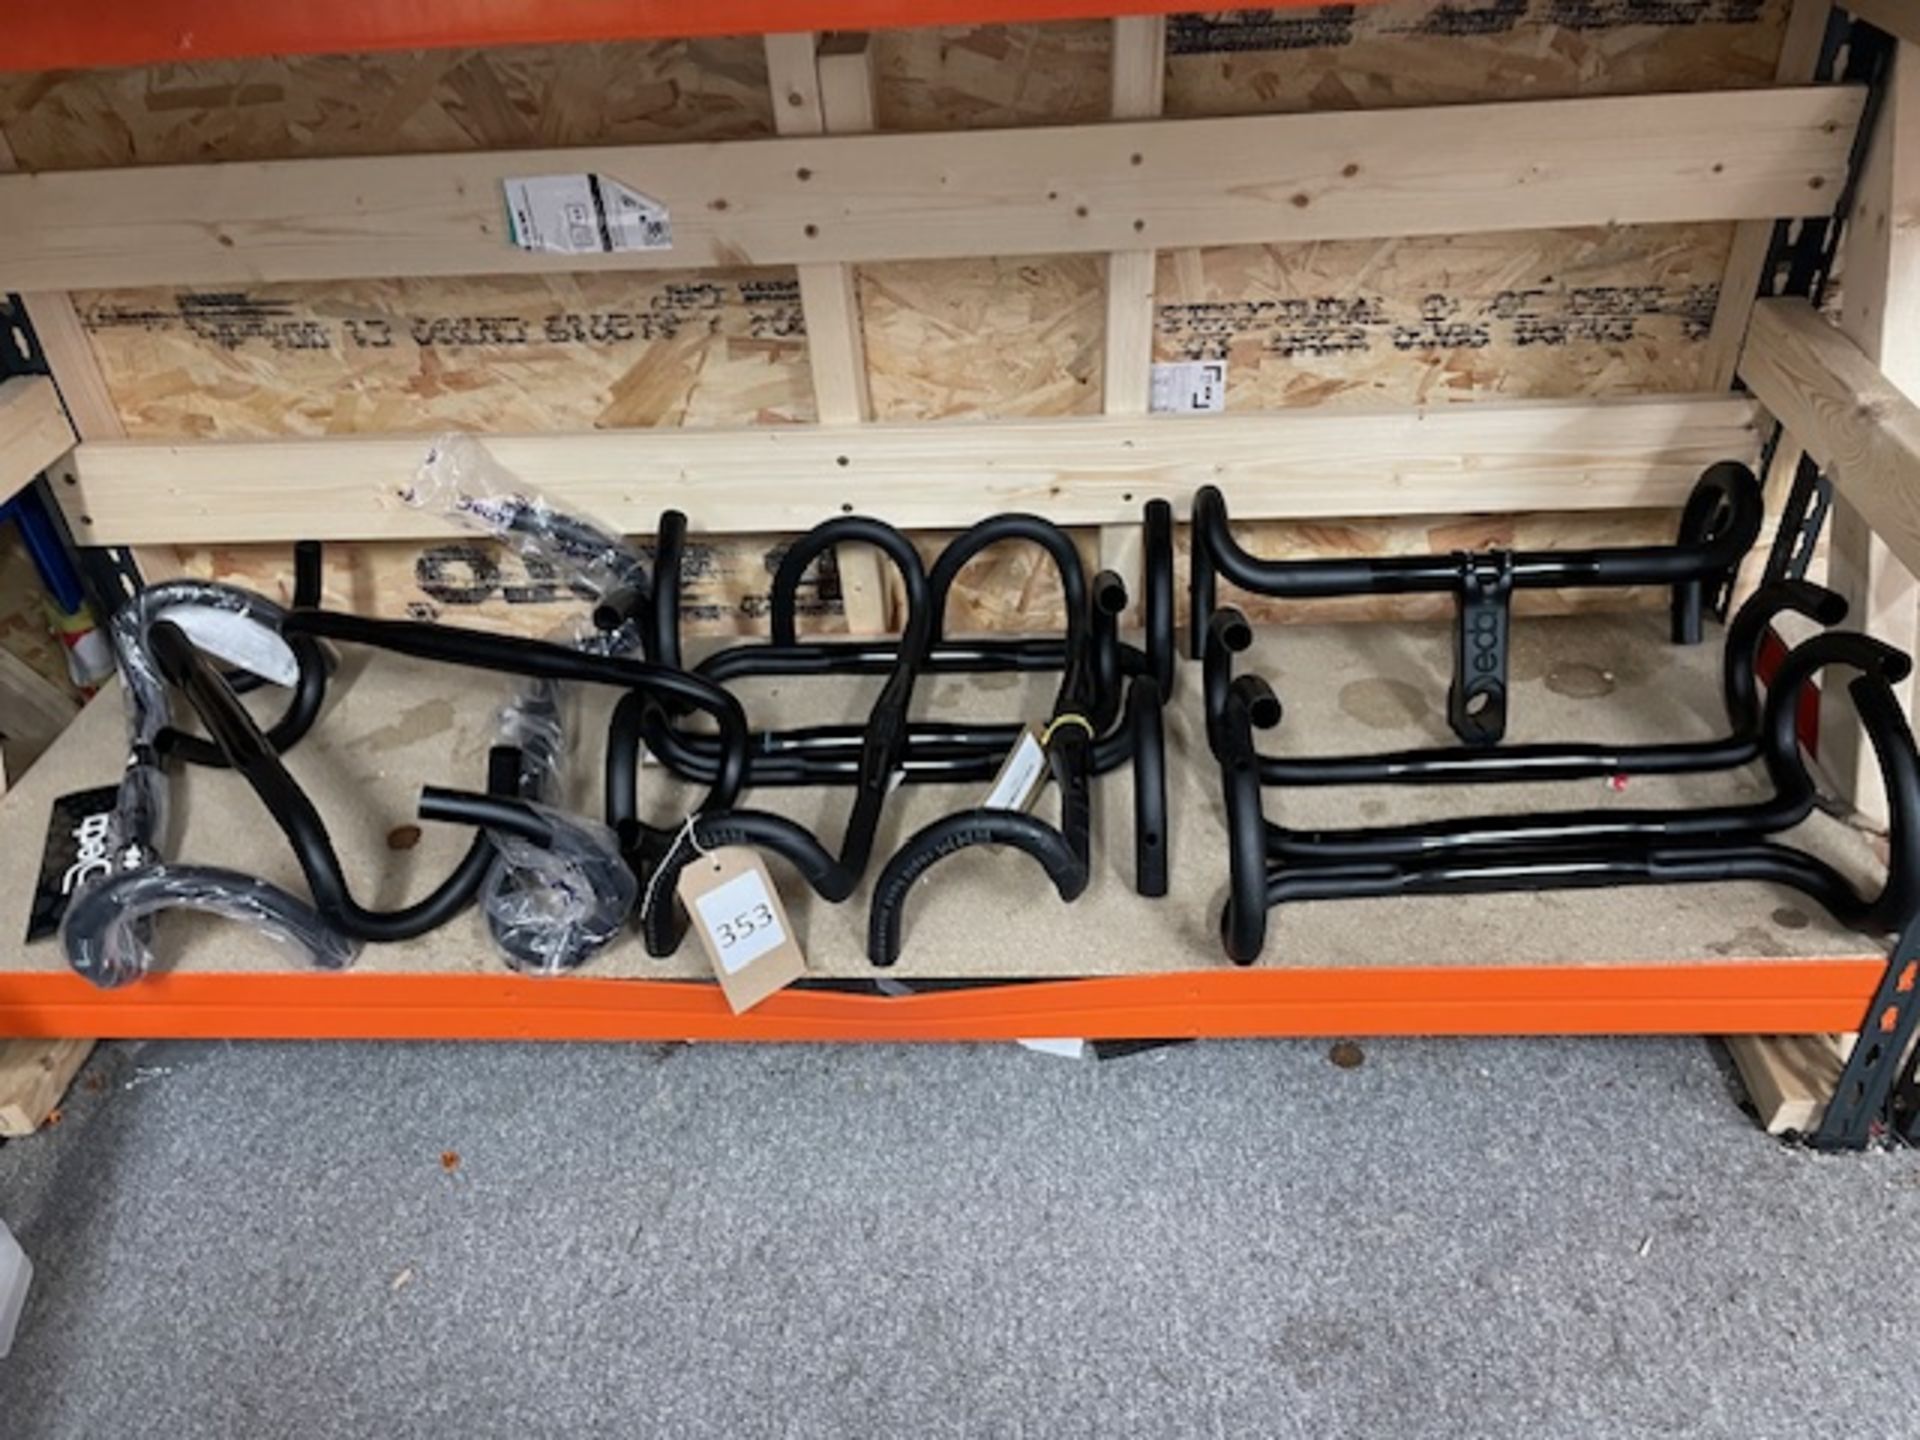 13 Pairs of Deda Handlebars (Location: Newport Pagnell. Please Refer to General Notes)